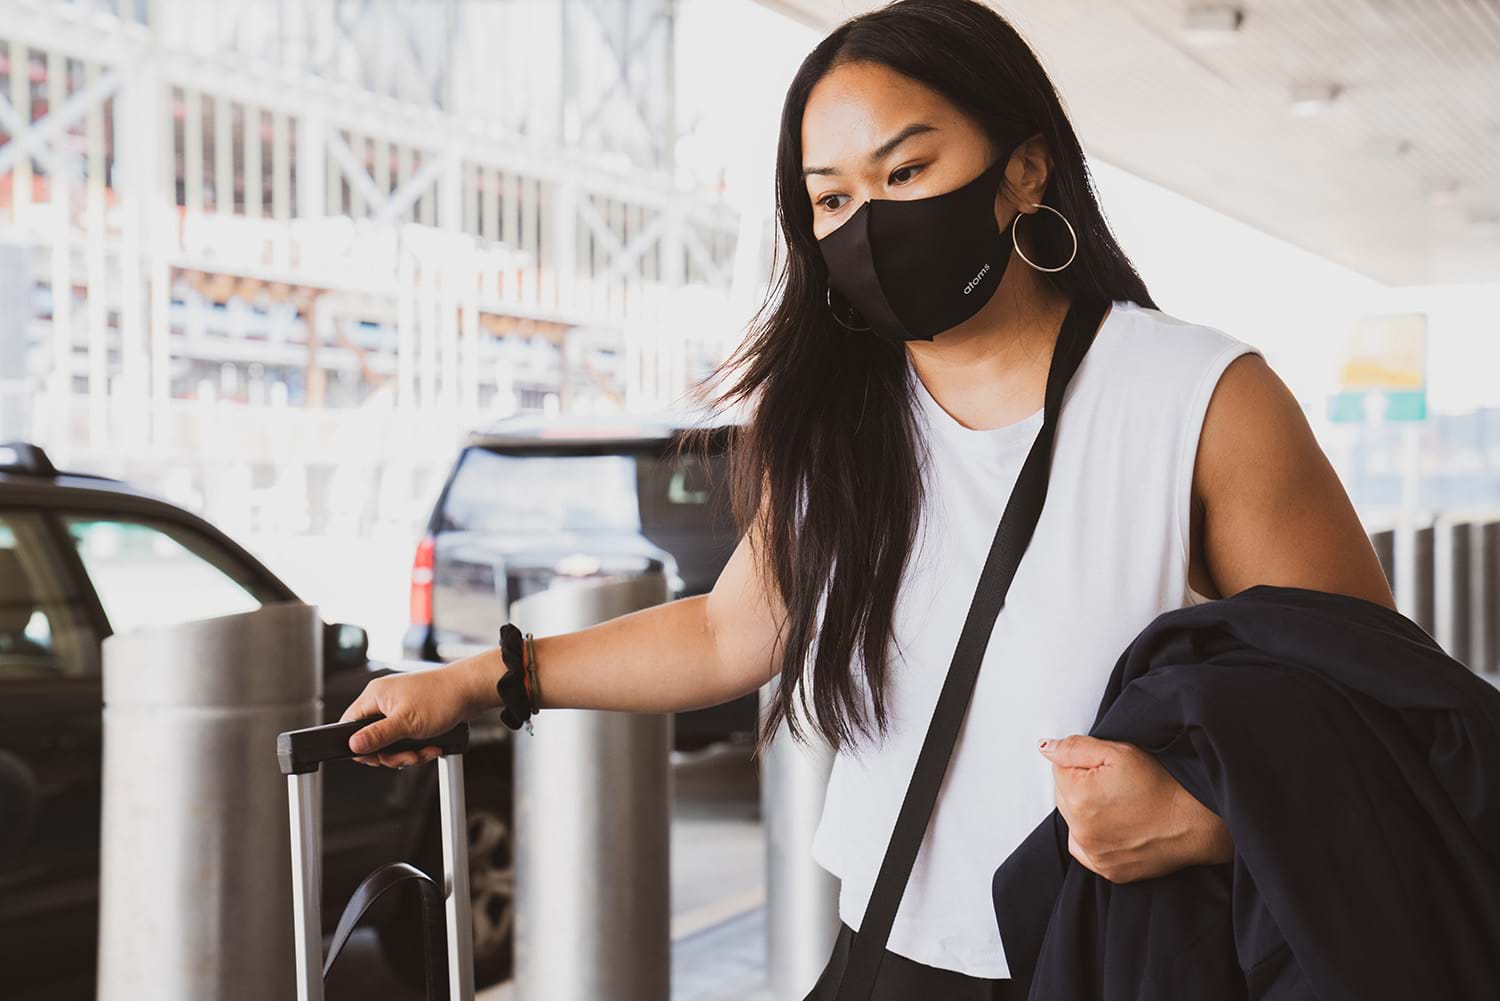 Woman in facemask leaving airport